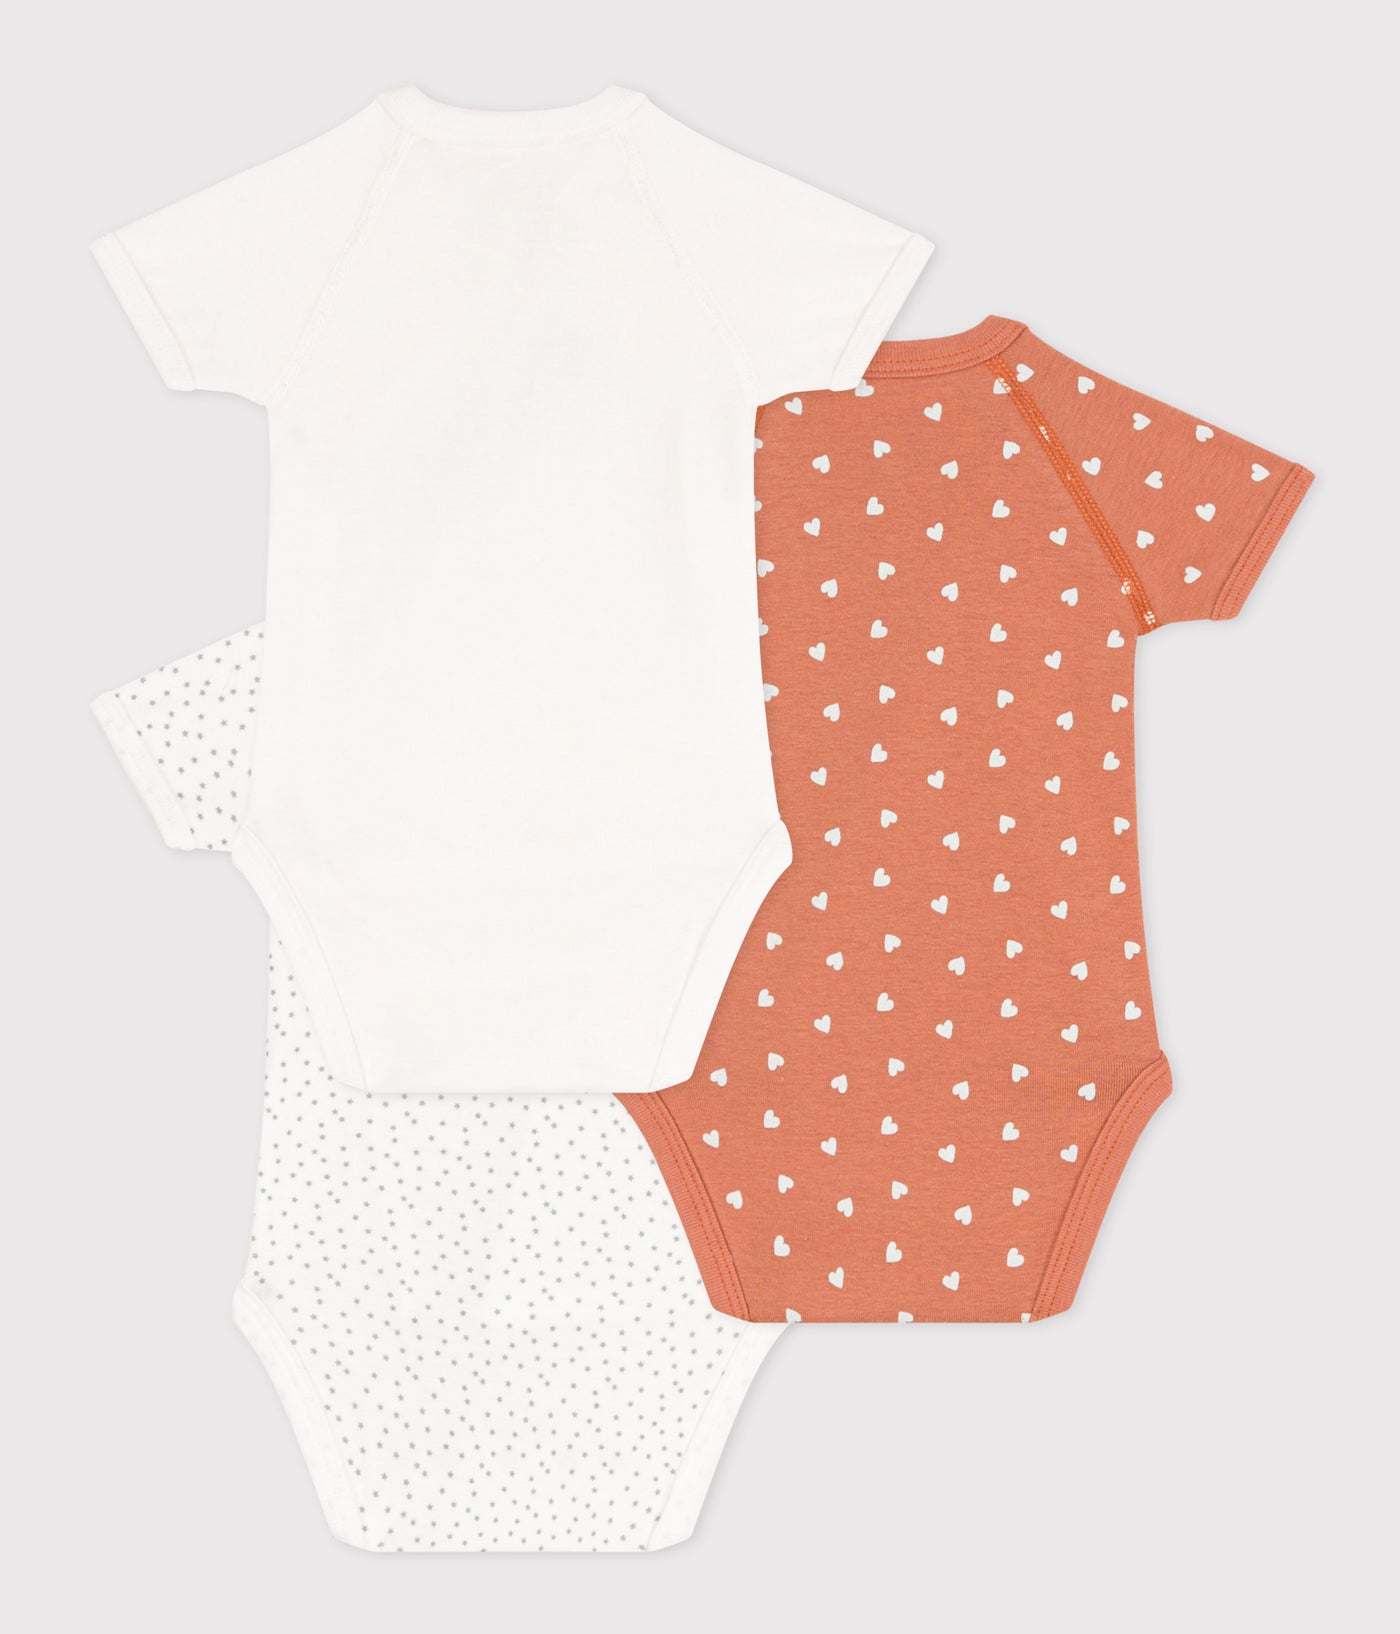 PACK OF 3 BABIES' SHORT-SLEEVED COTTON BODYSUITS